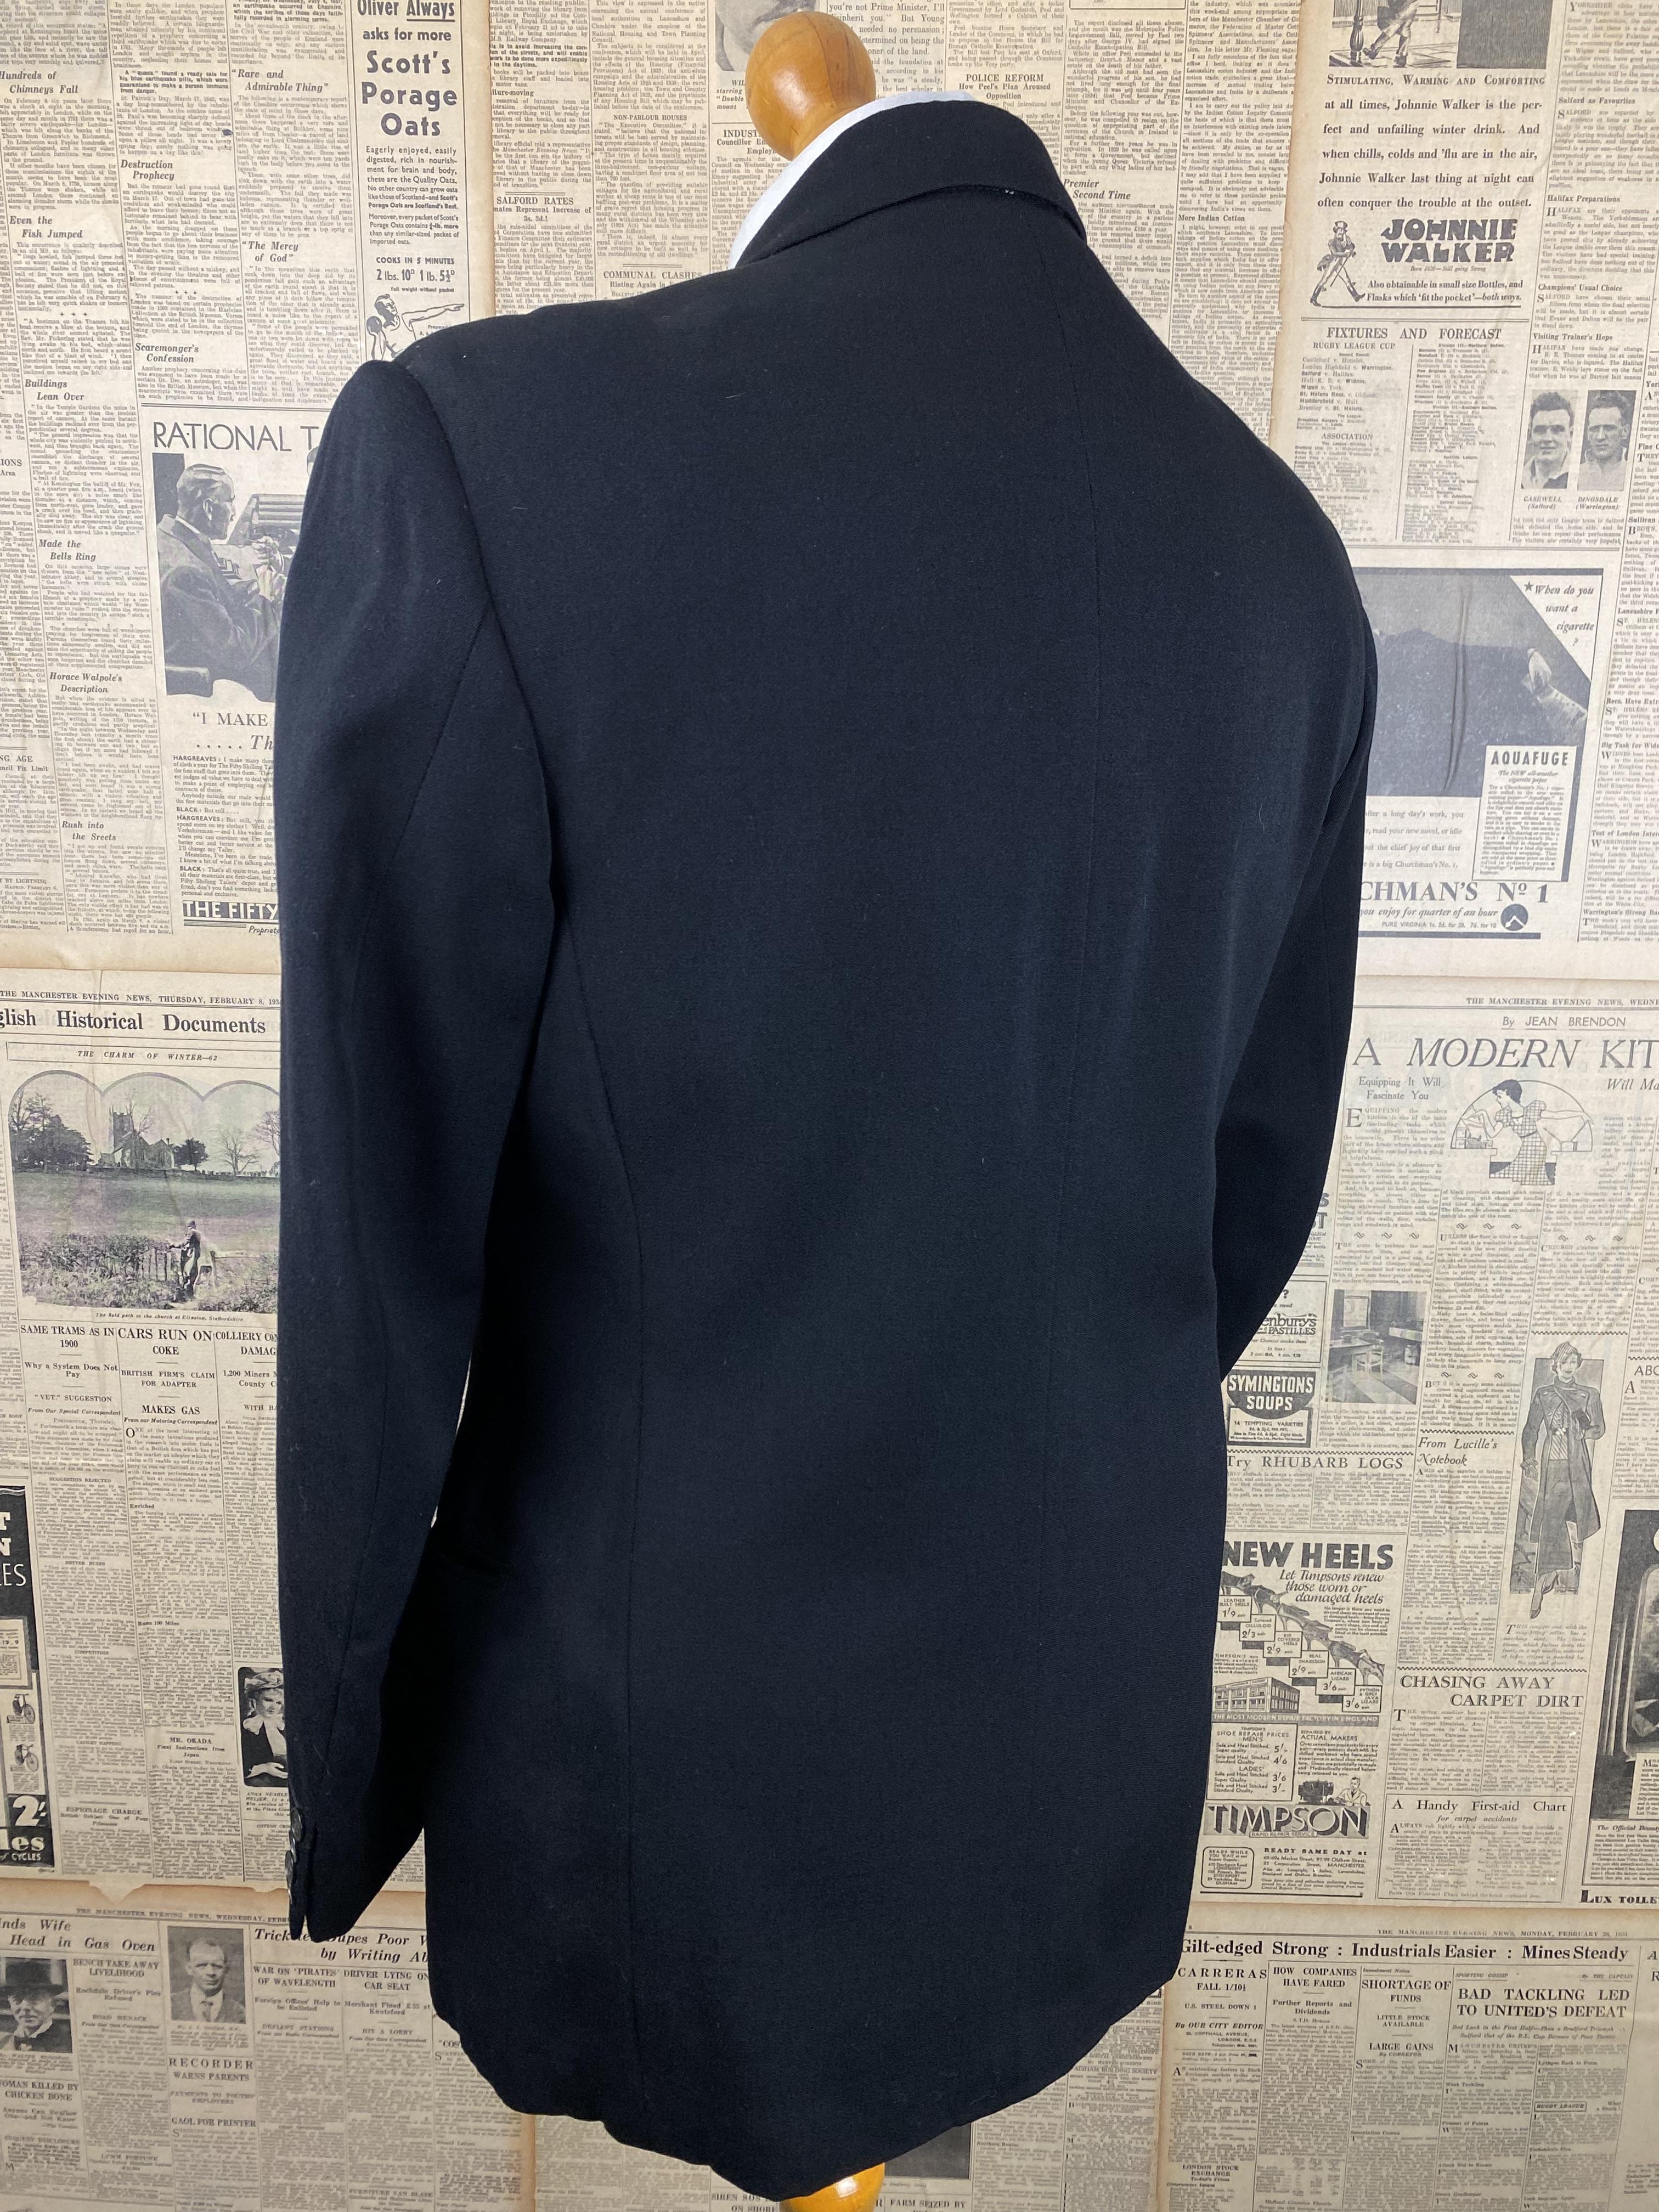 Vintage 1940's double breasted dinner jacket size 40 long